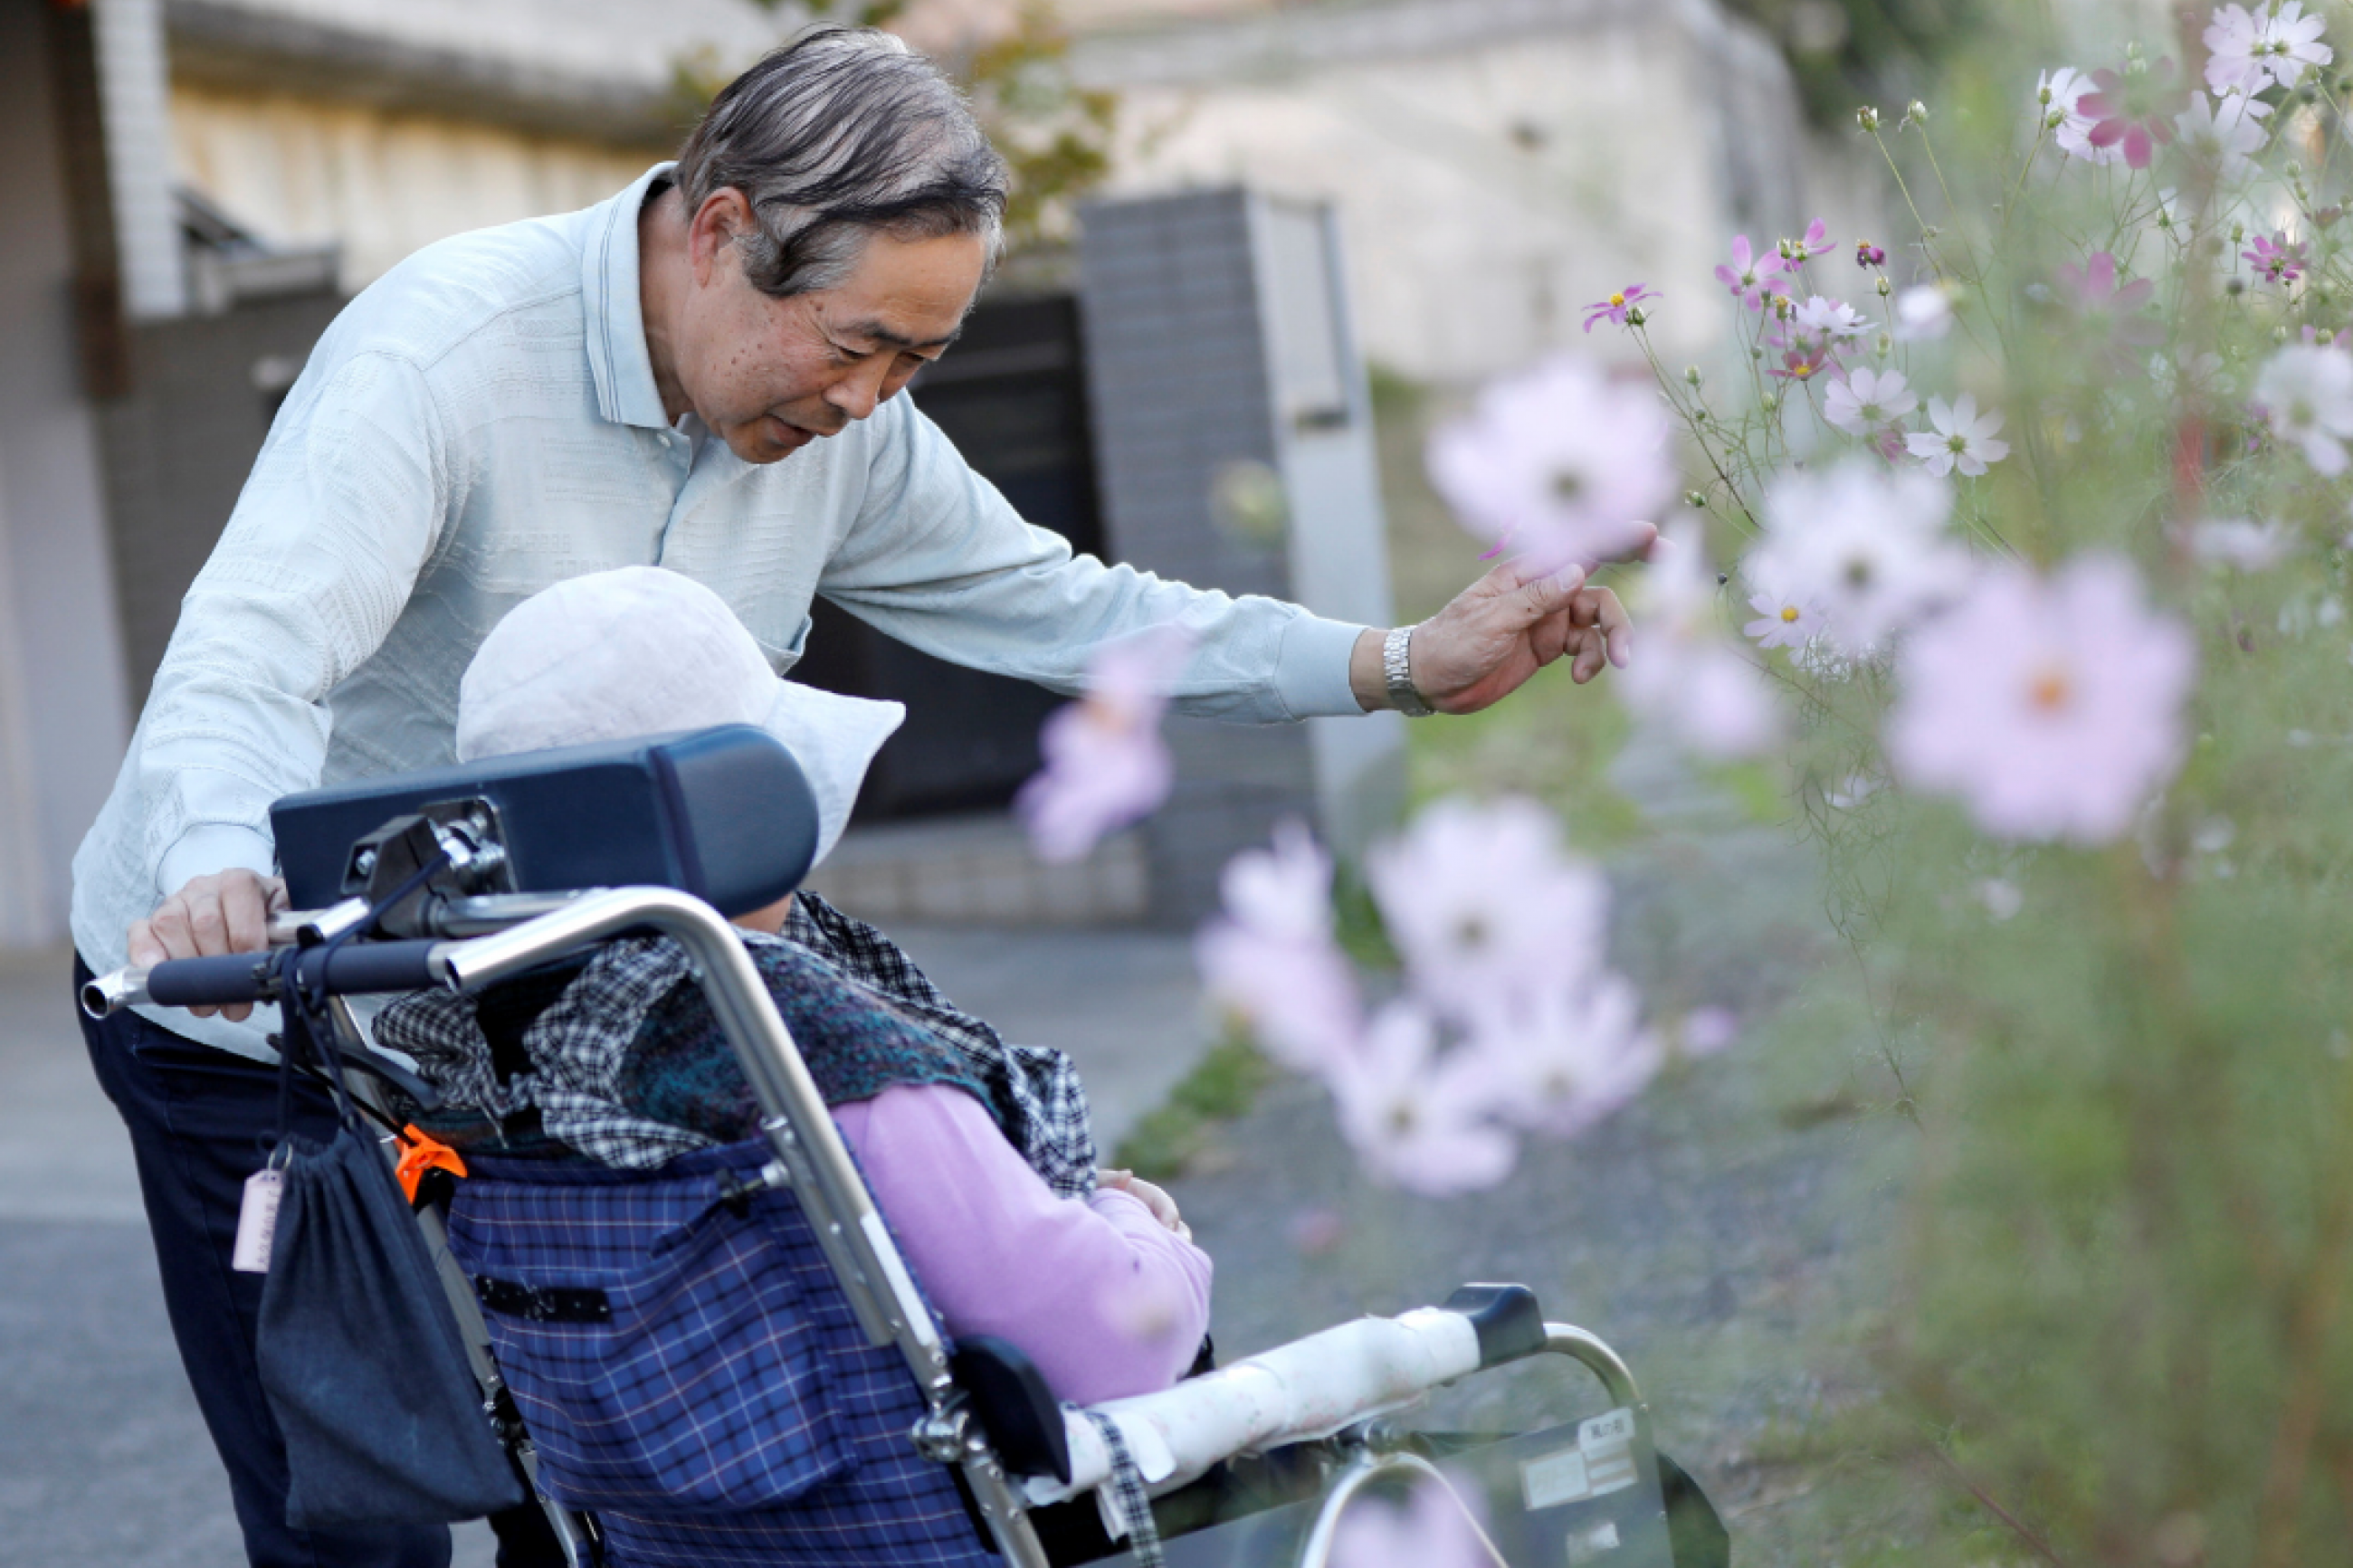 Eiichi Okubo, 71, speaks to his wife Yumiko, 68, who has been suffering from dementia, near her care house in Tokyo, Japan, on October 29, 2018.